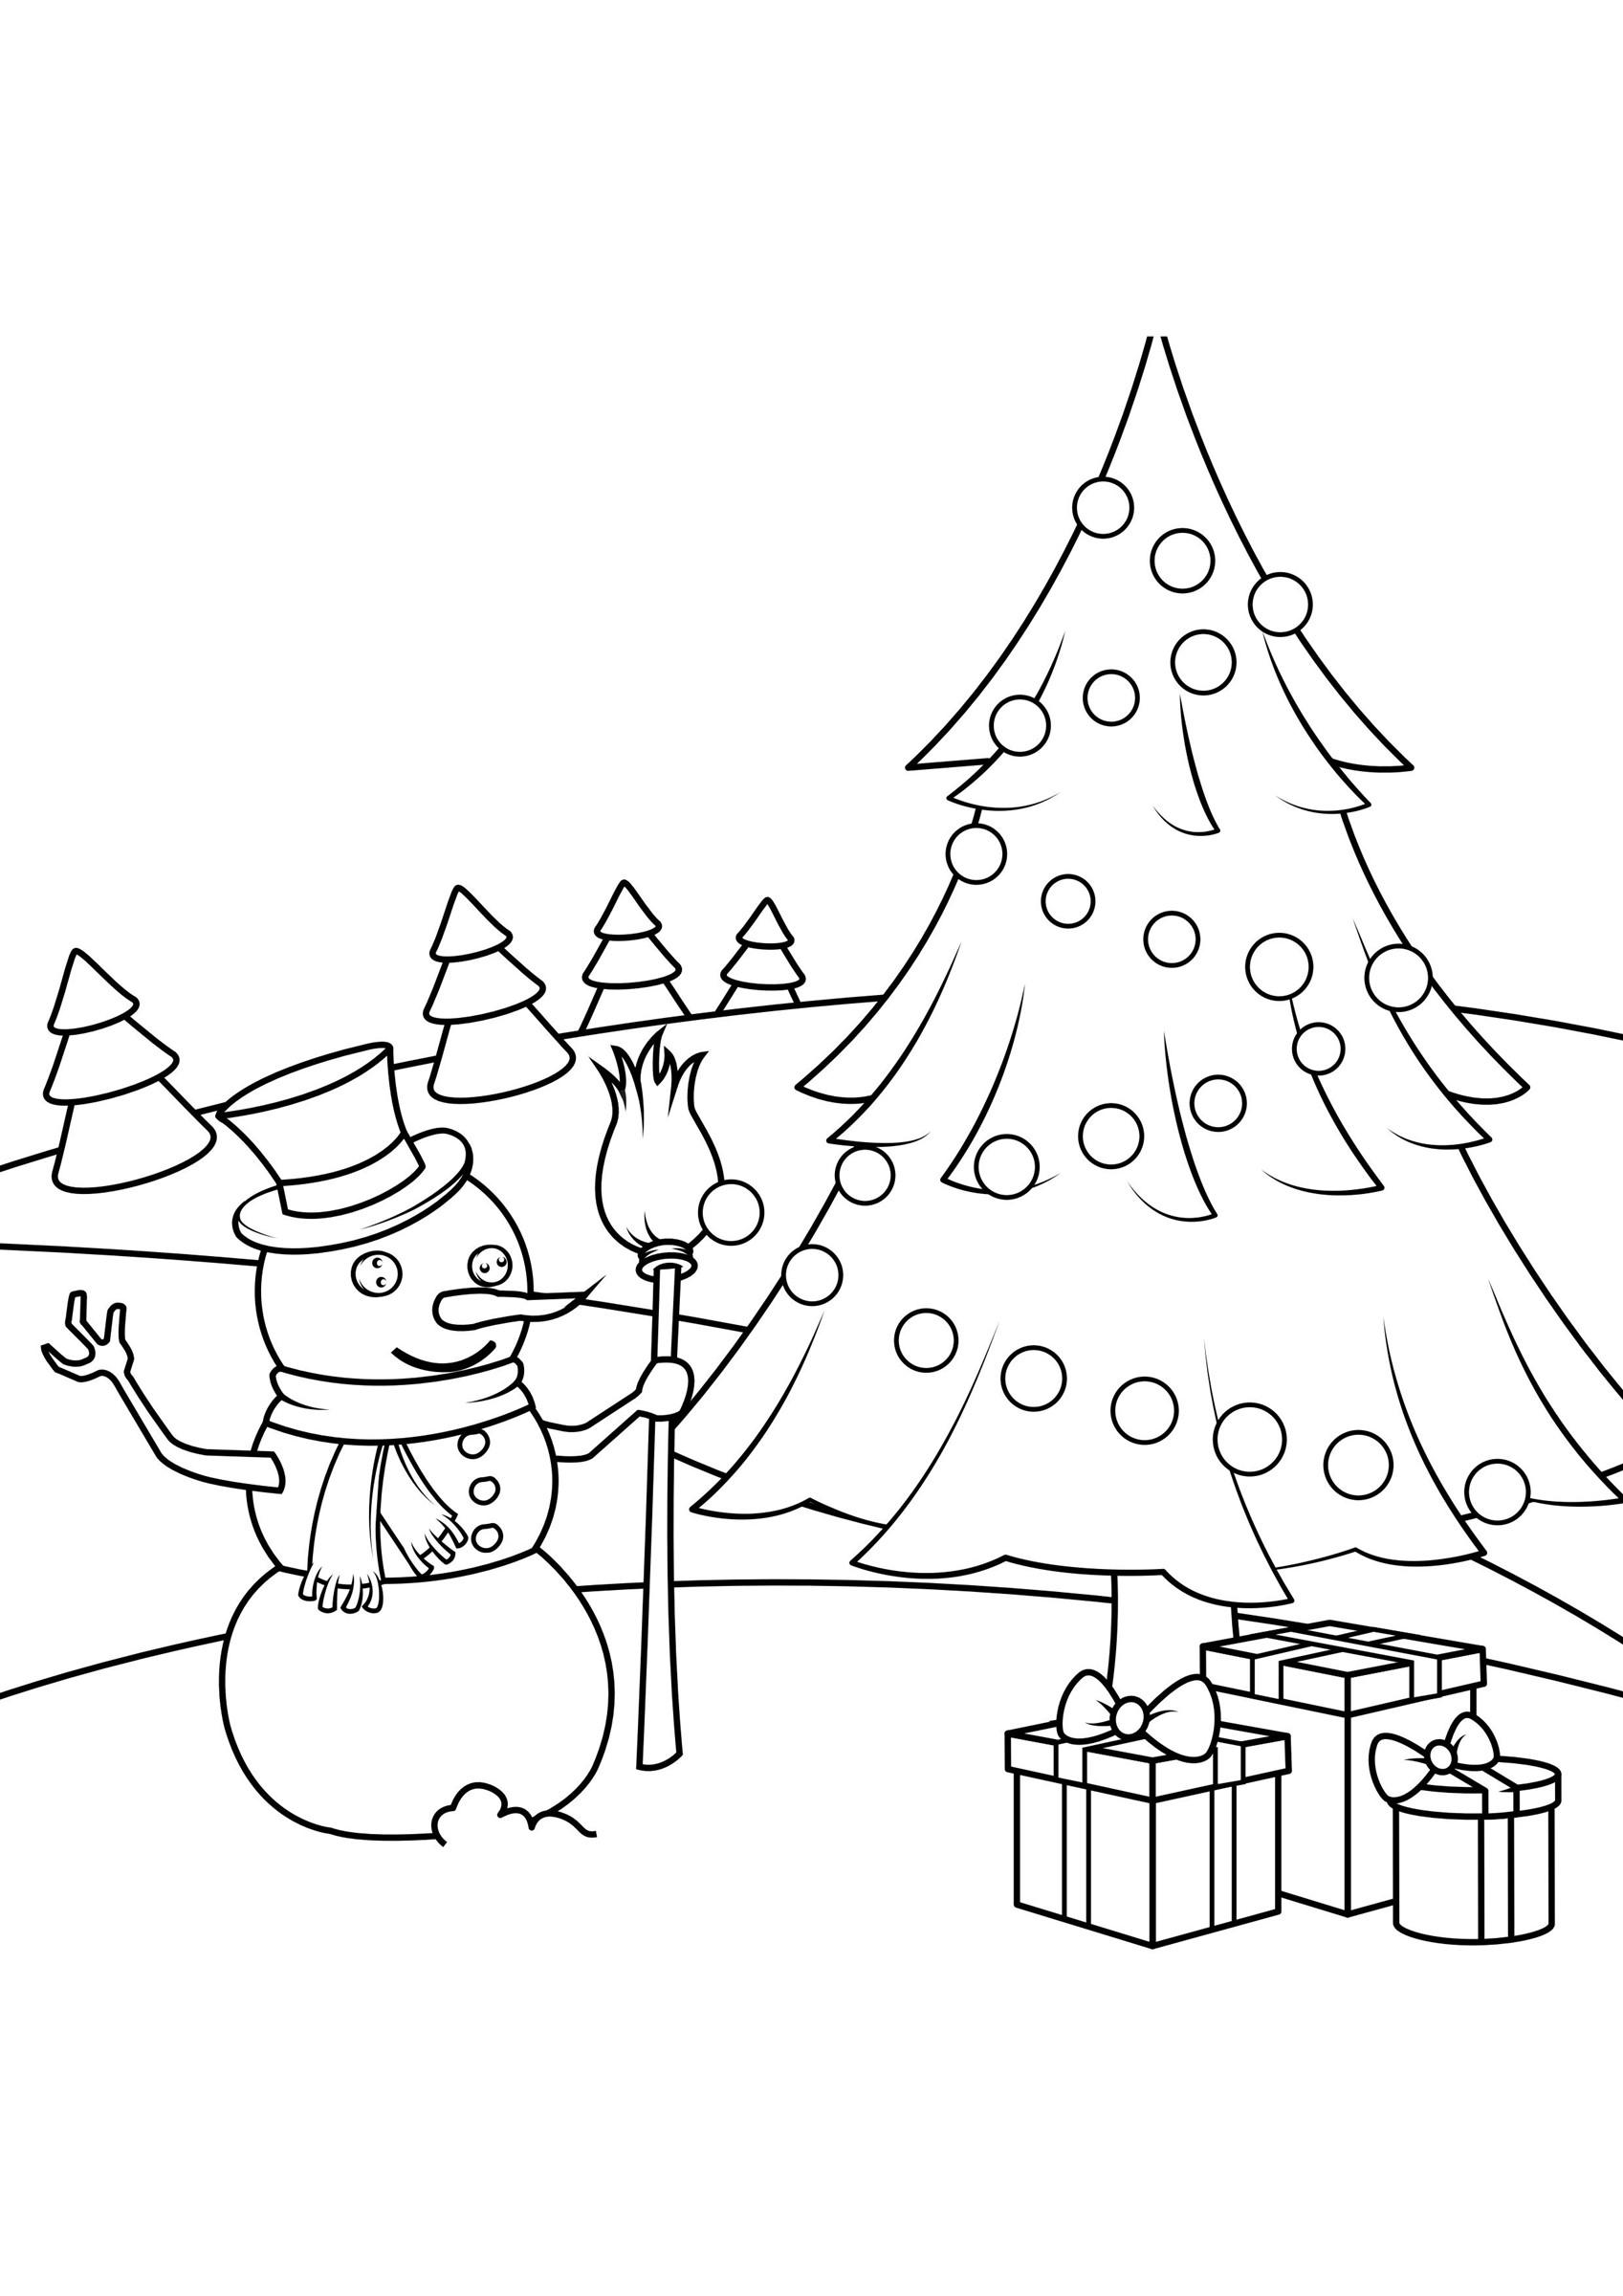 Coloring page christmas scene